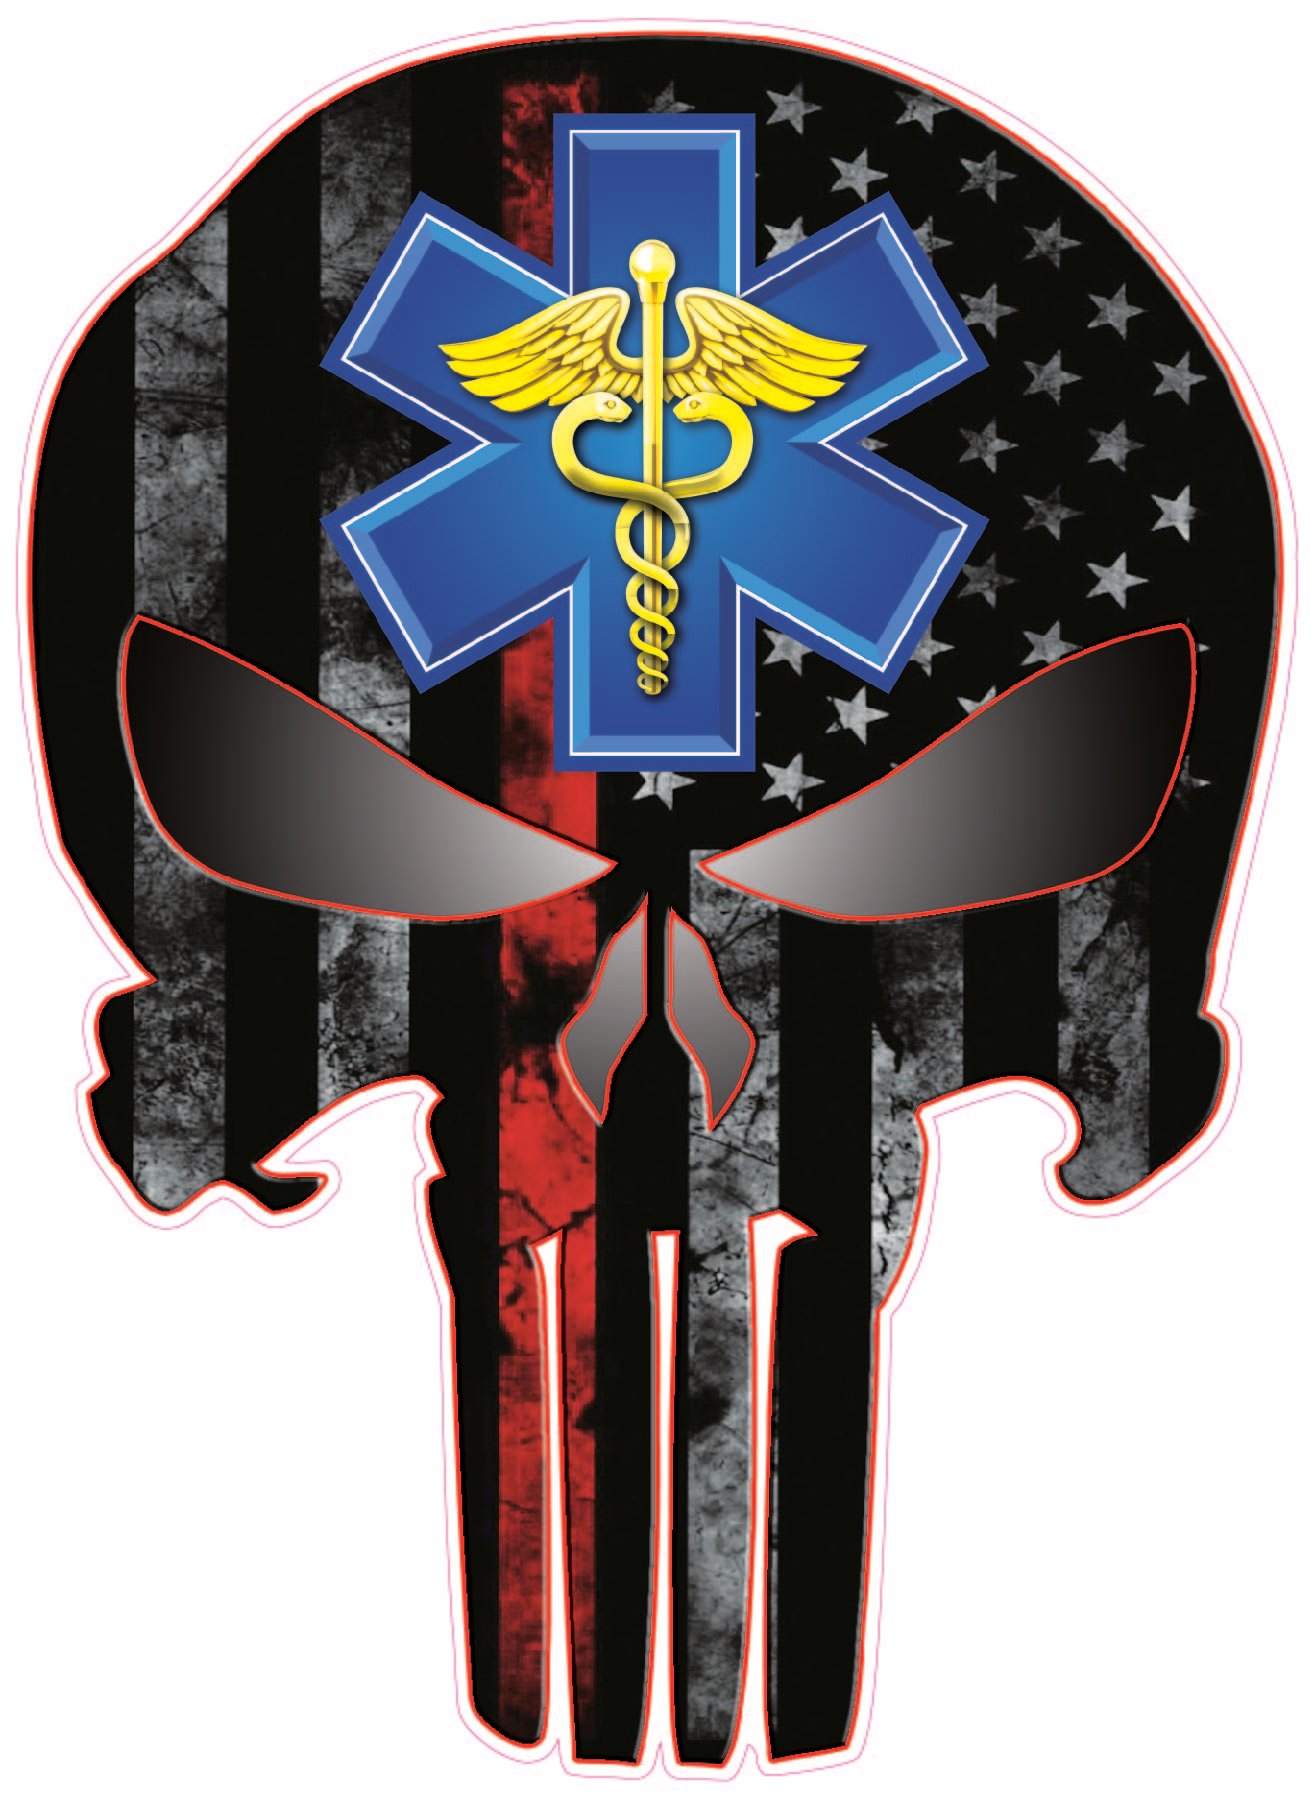 The brave men & woman in the medical industry. American flag wallpaper, Punisher, Skull wallpaper iphone